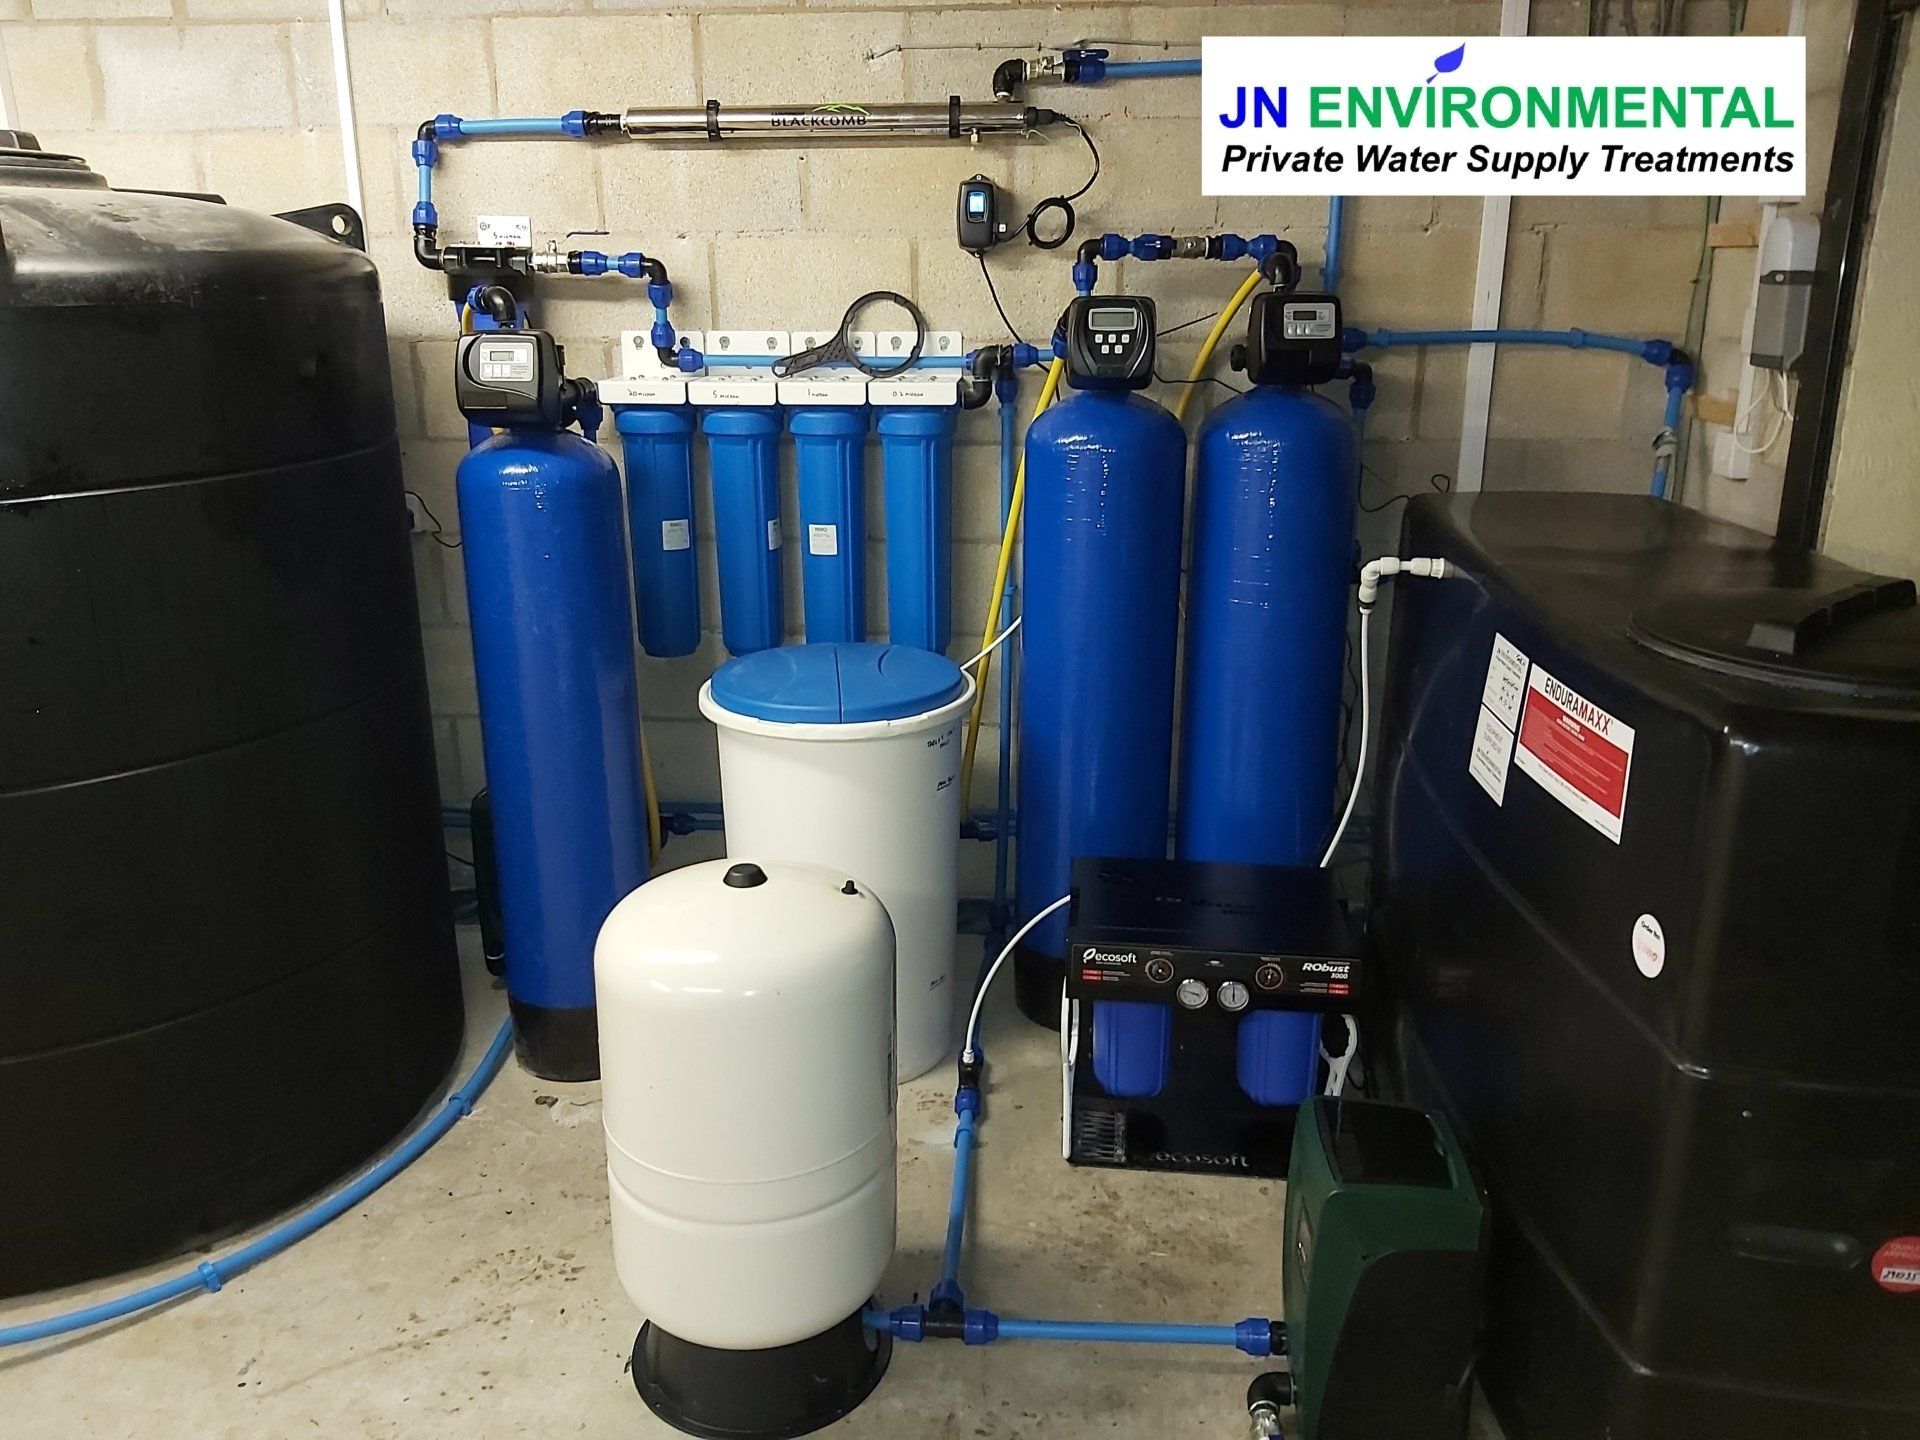 Private Water Supply Treatment in Llwynmawr, North Wales